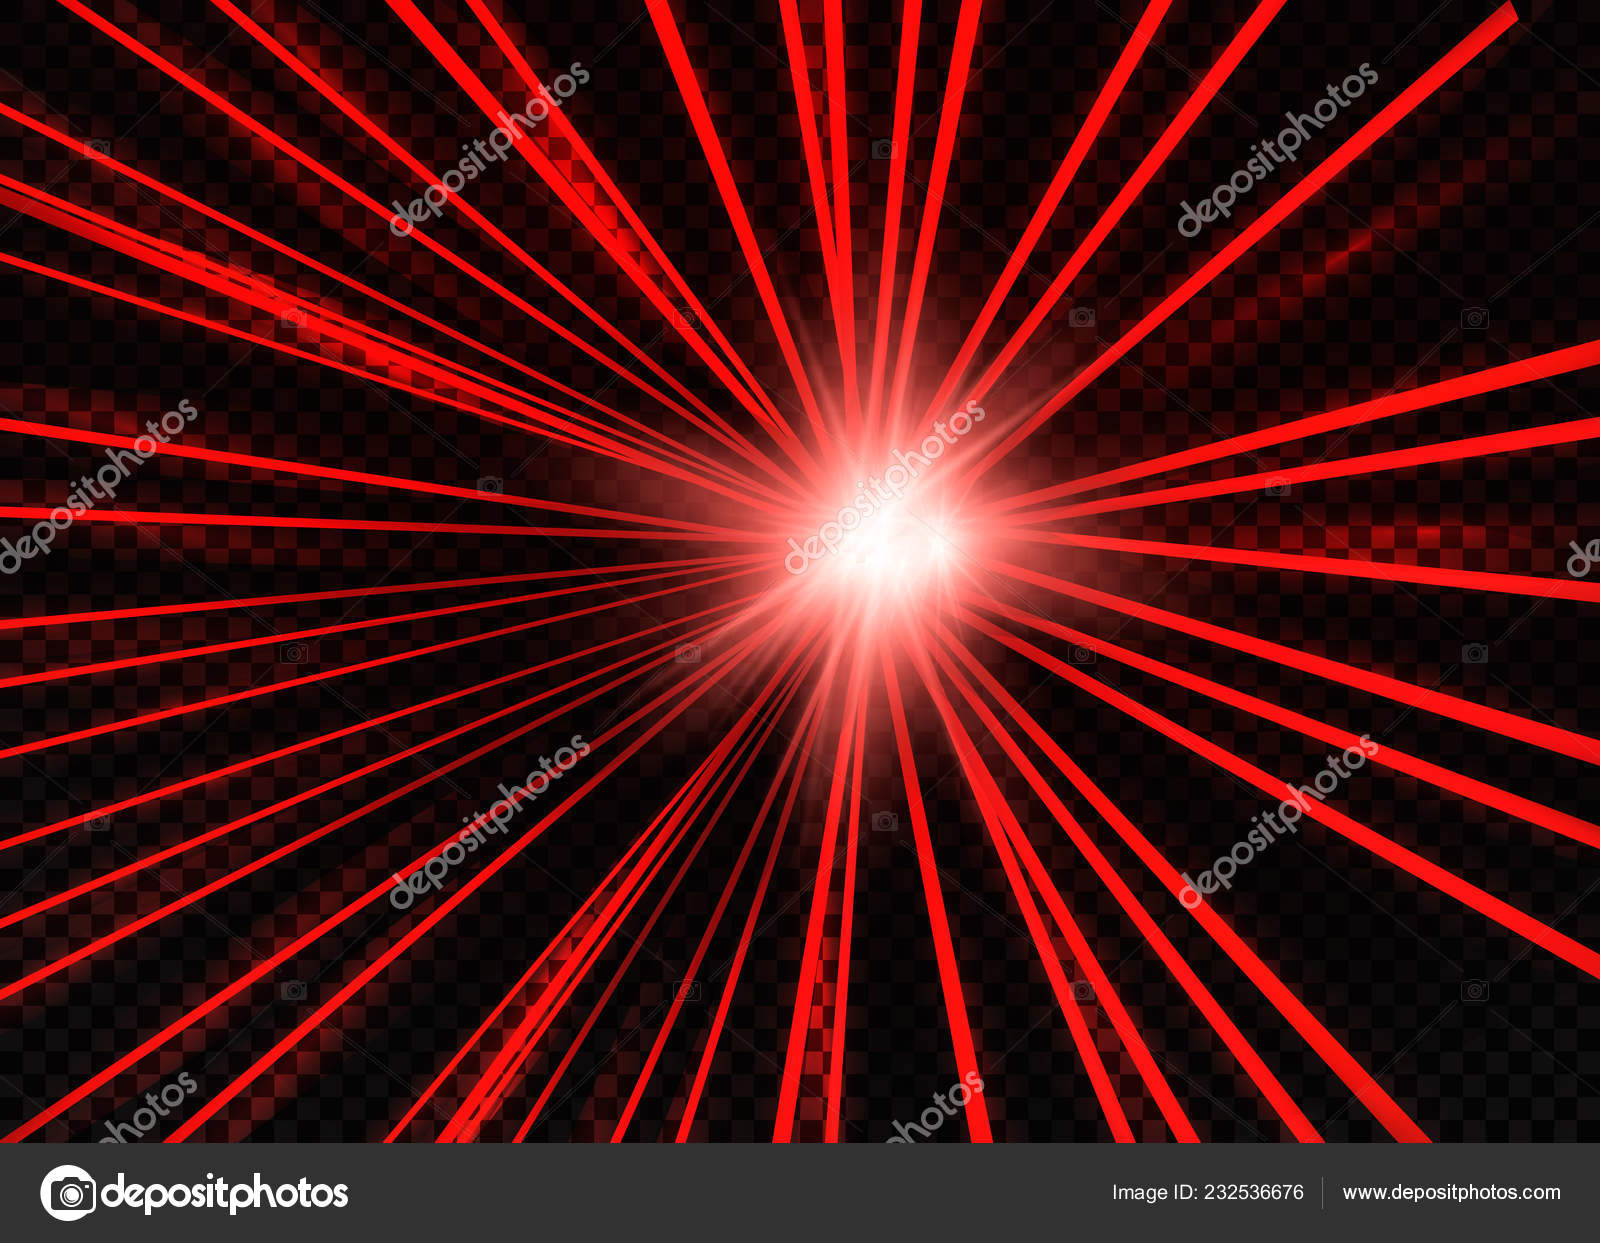 Abstract Red Laser Isolated Black Background Vector Illustration Stock Vector ©kume111000 232536676